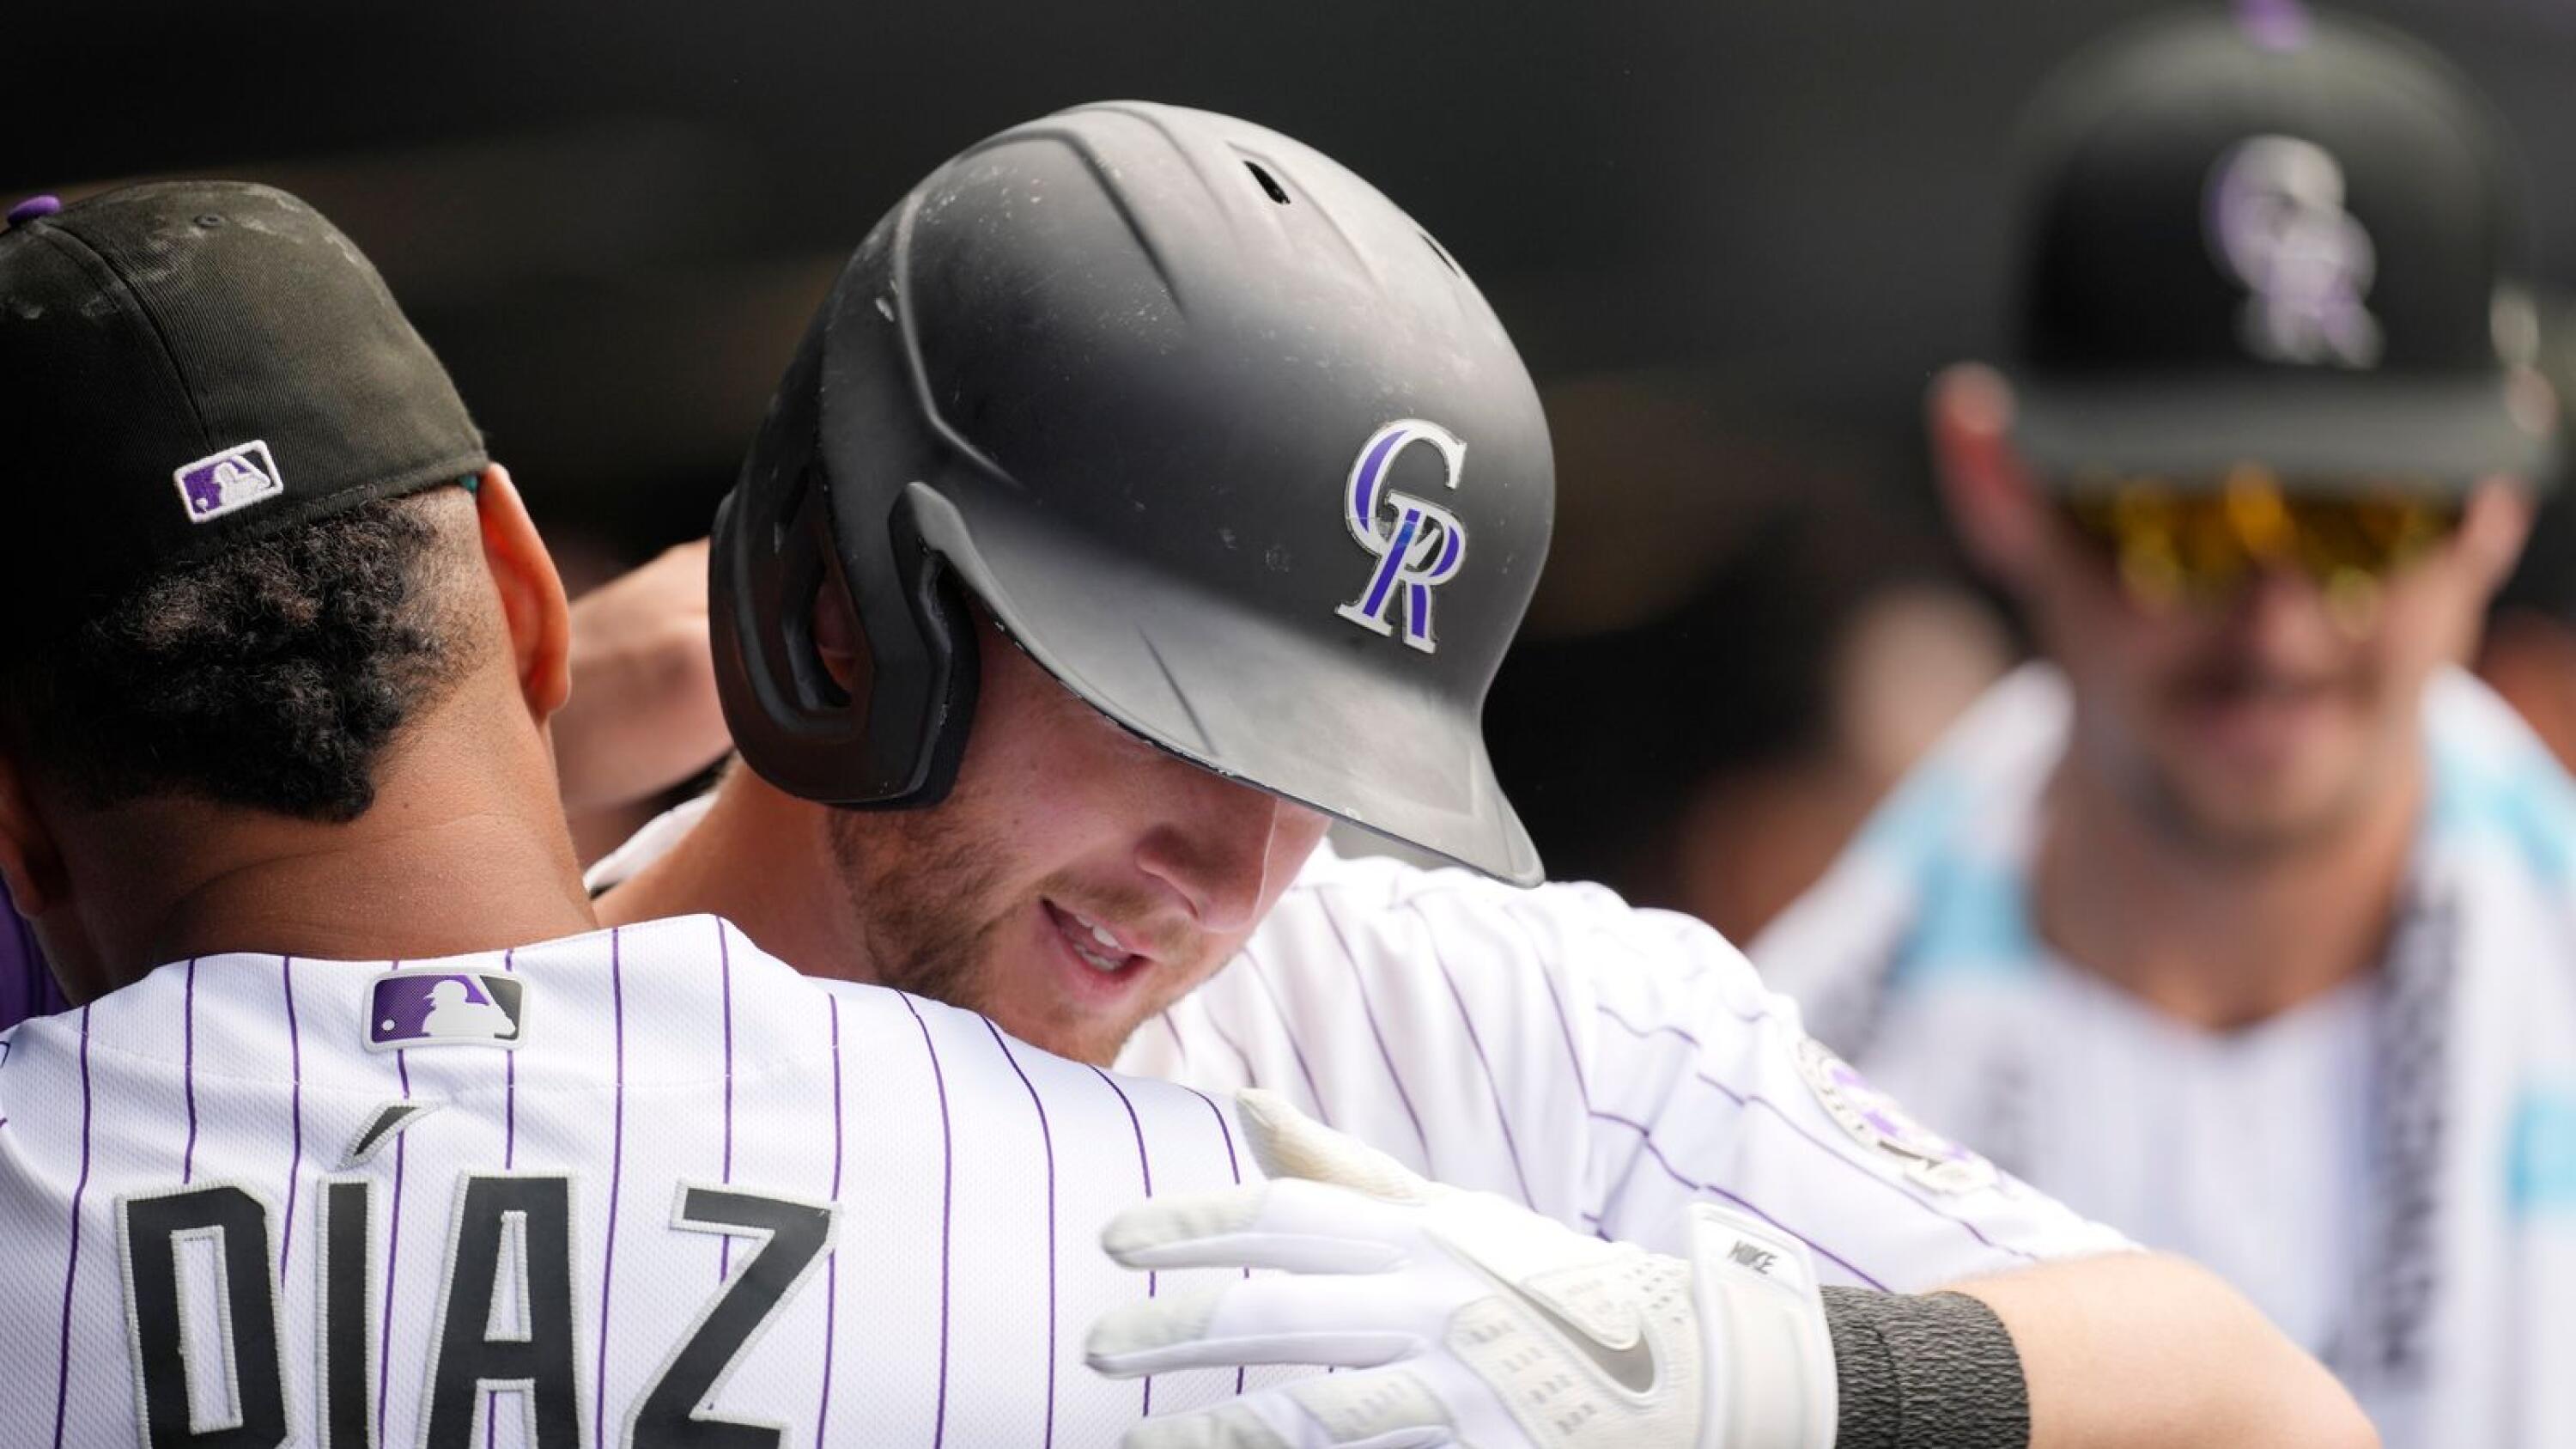 McMahon homers, drives in 5 as Rockies rally to beat Mets 11-10